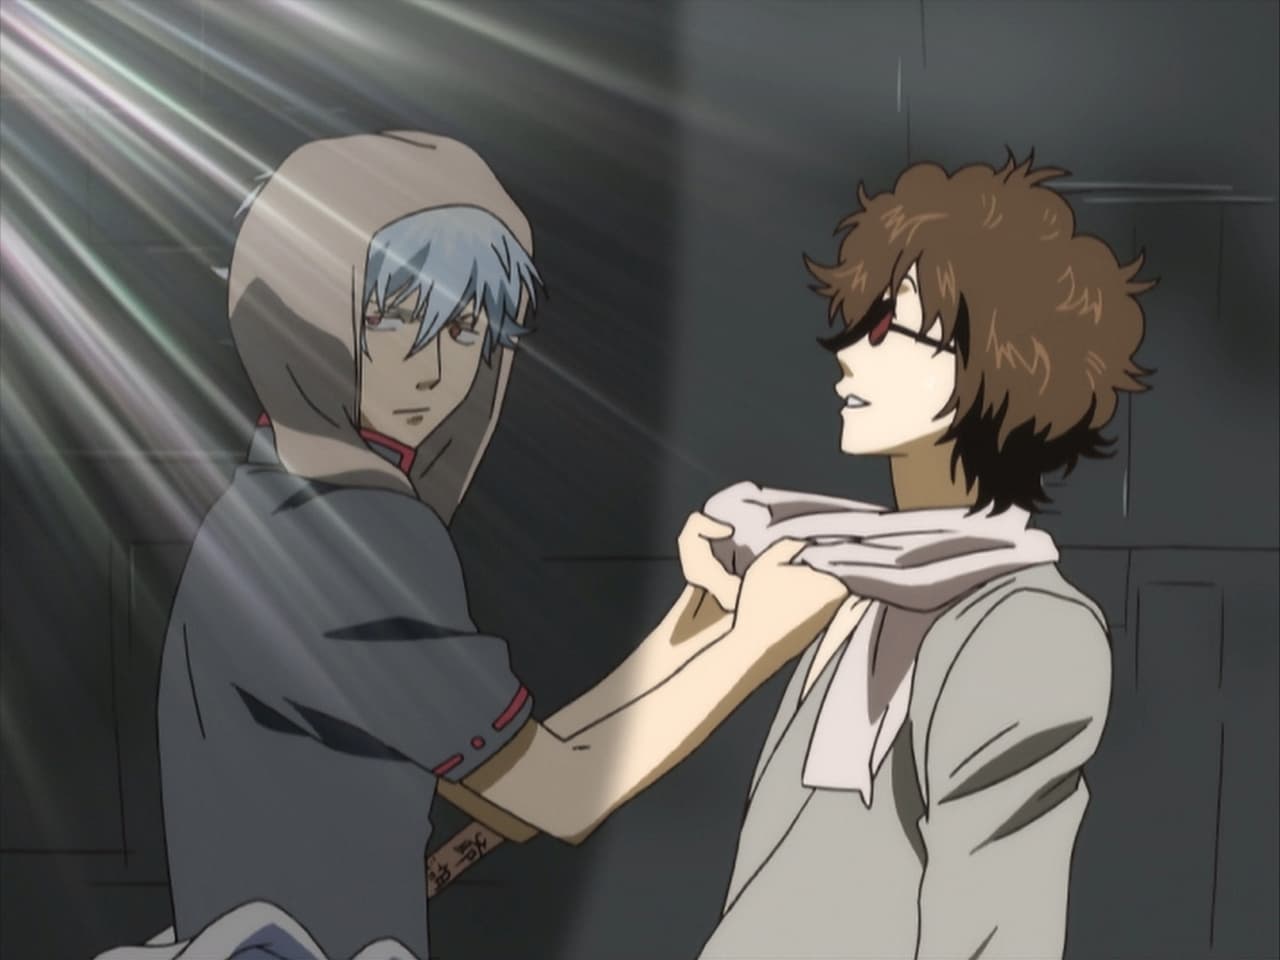 Gintama - Season 1 Episode 23 : When You're In a Fix, Keep On Laughing, Laughing...